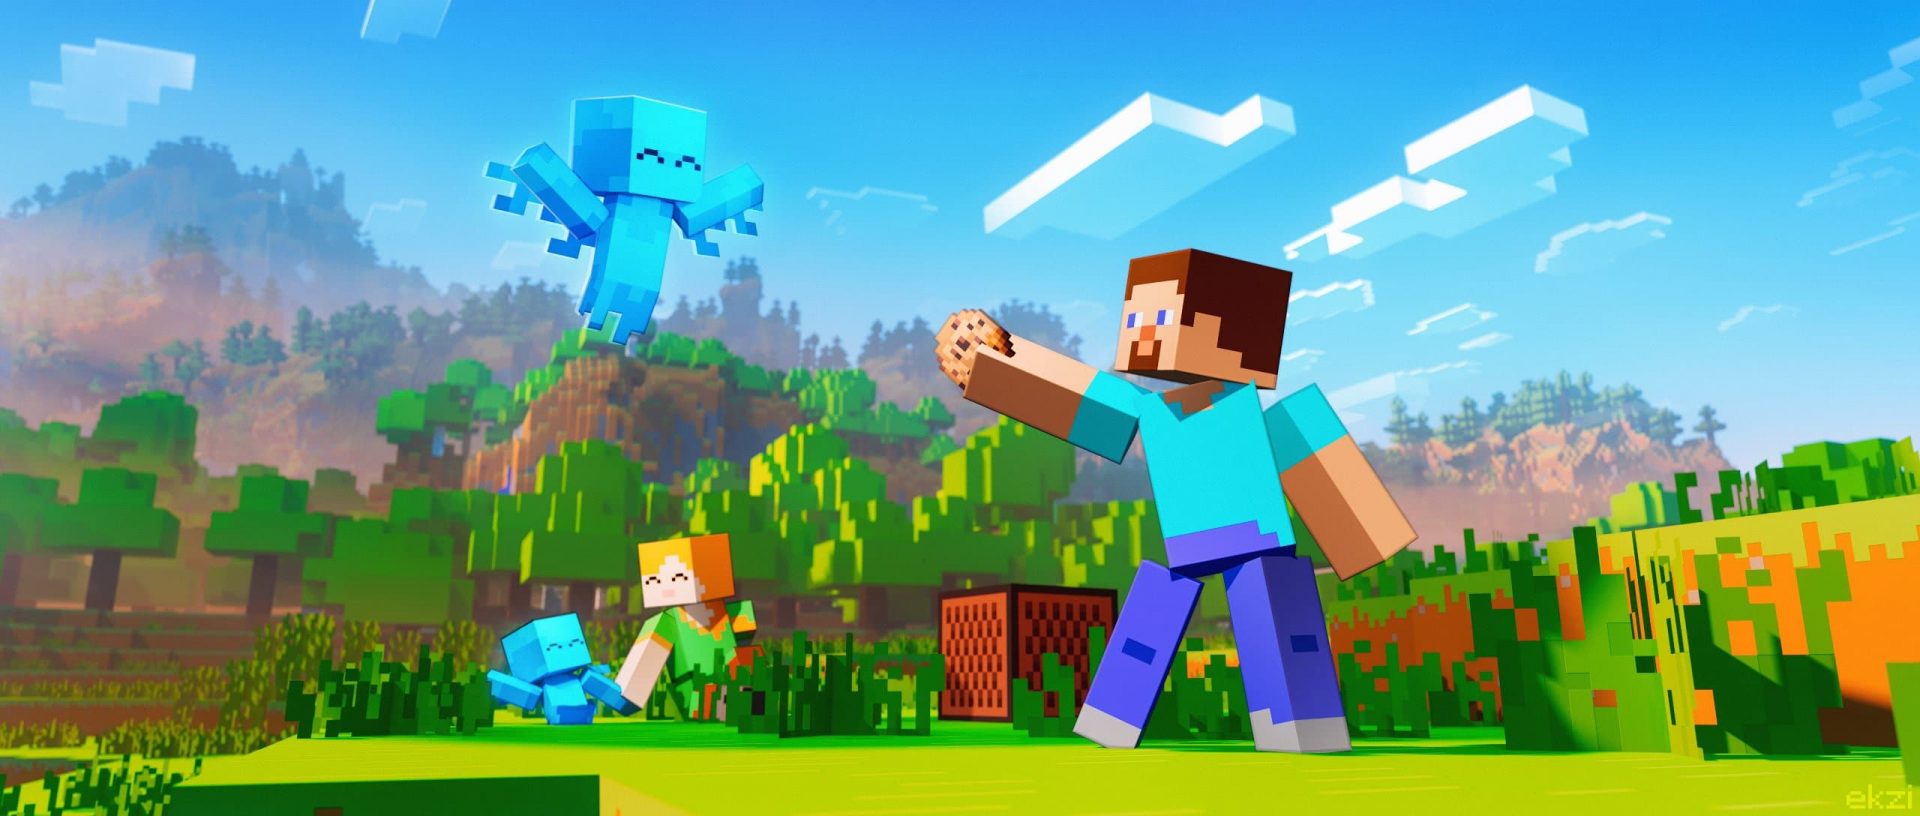 The Allay in Minecraft: what we know about this creature